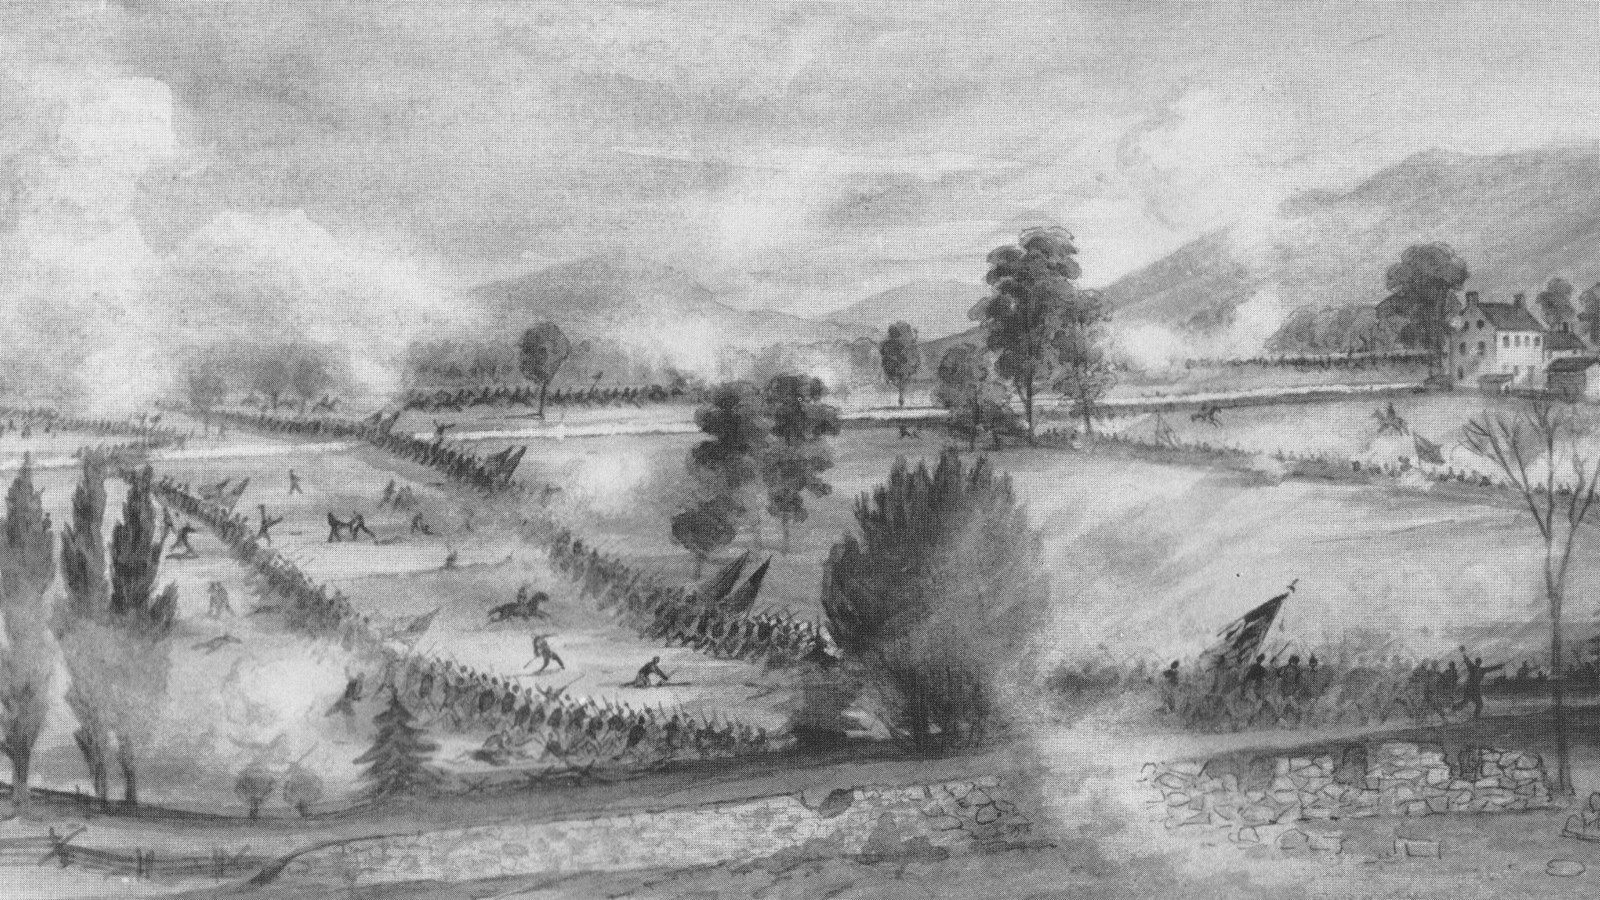 A sketch depicts opposing lines of 1860s soldiers battling amid farm fields.